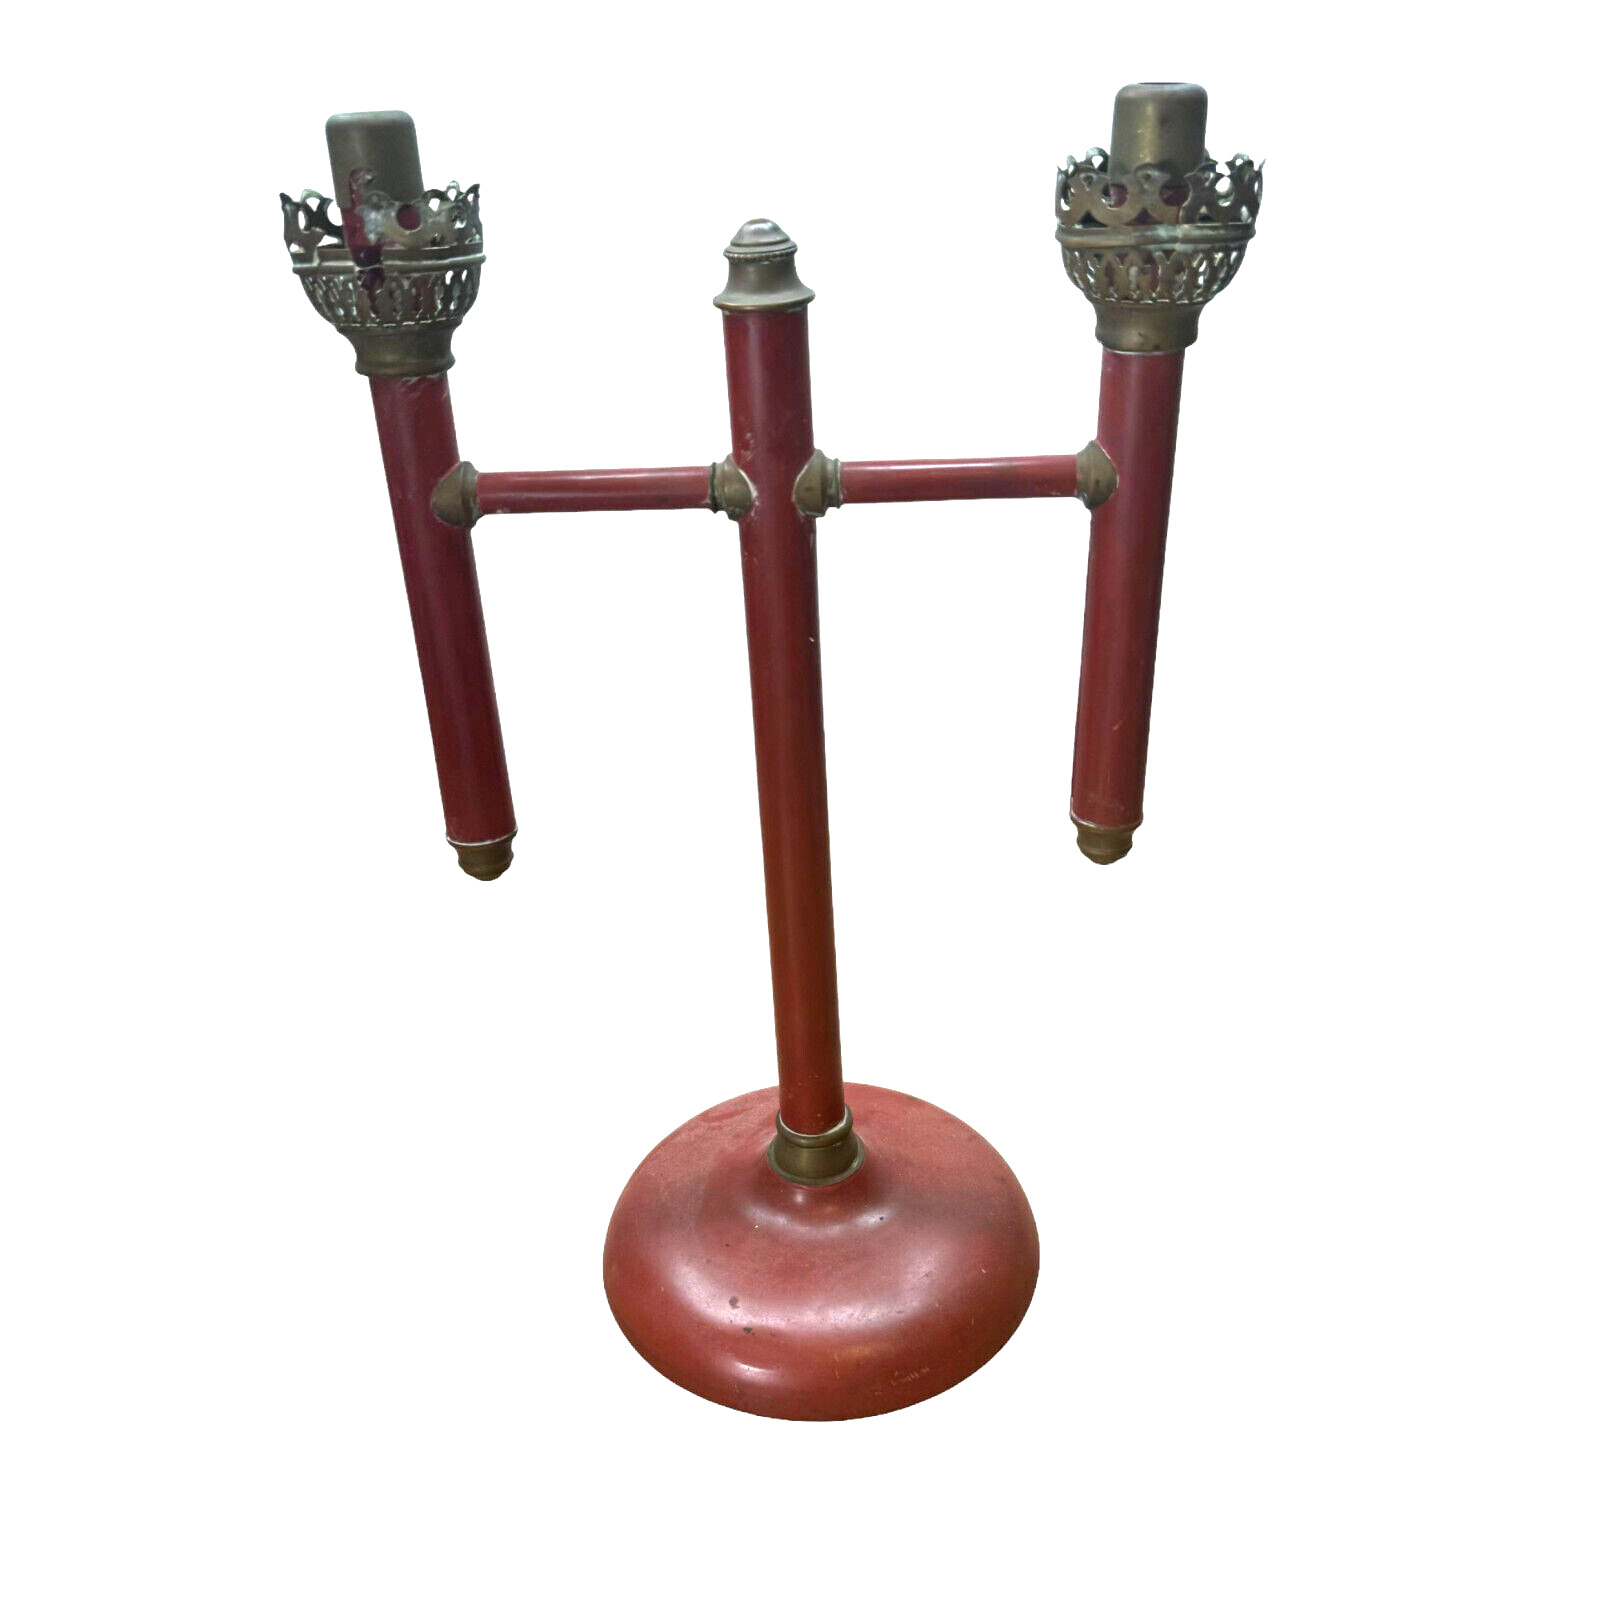 Antique Wrought Iron Candelabra Double Holder Red Platina 18